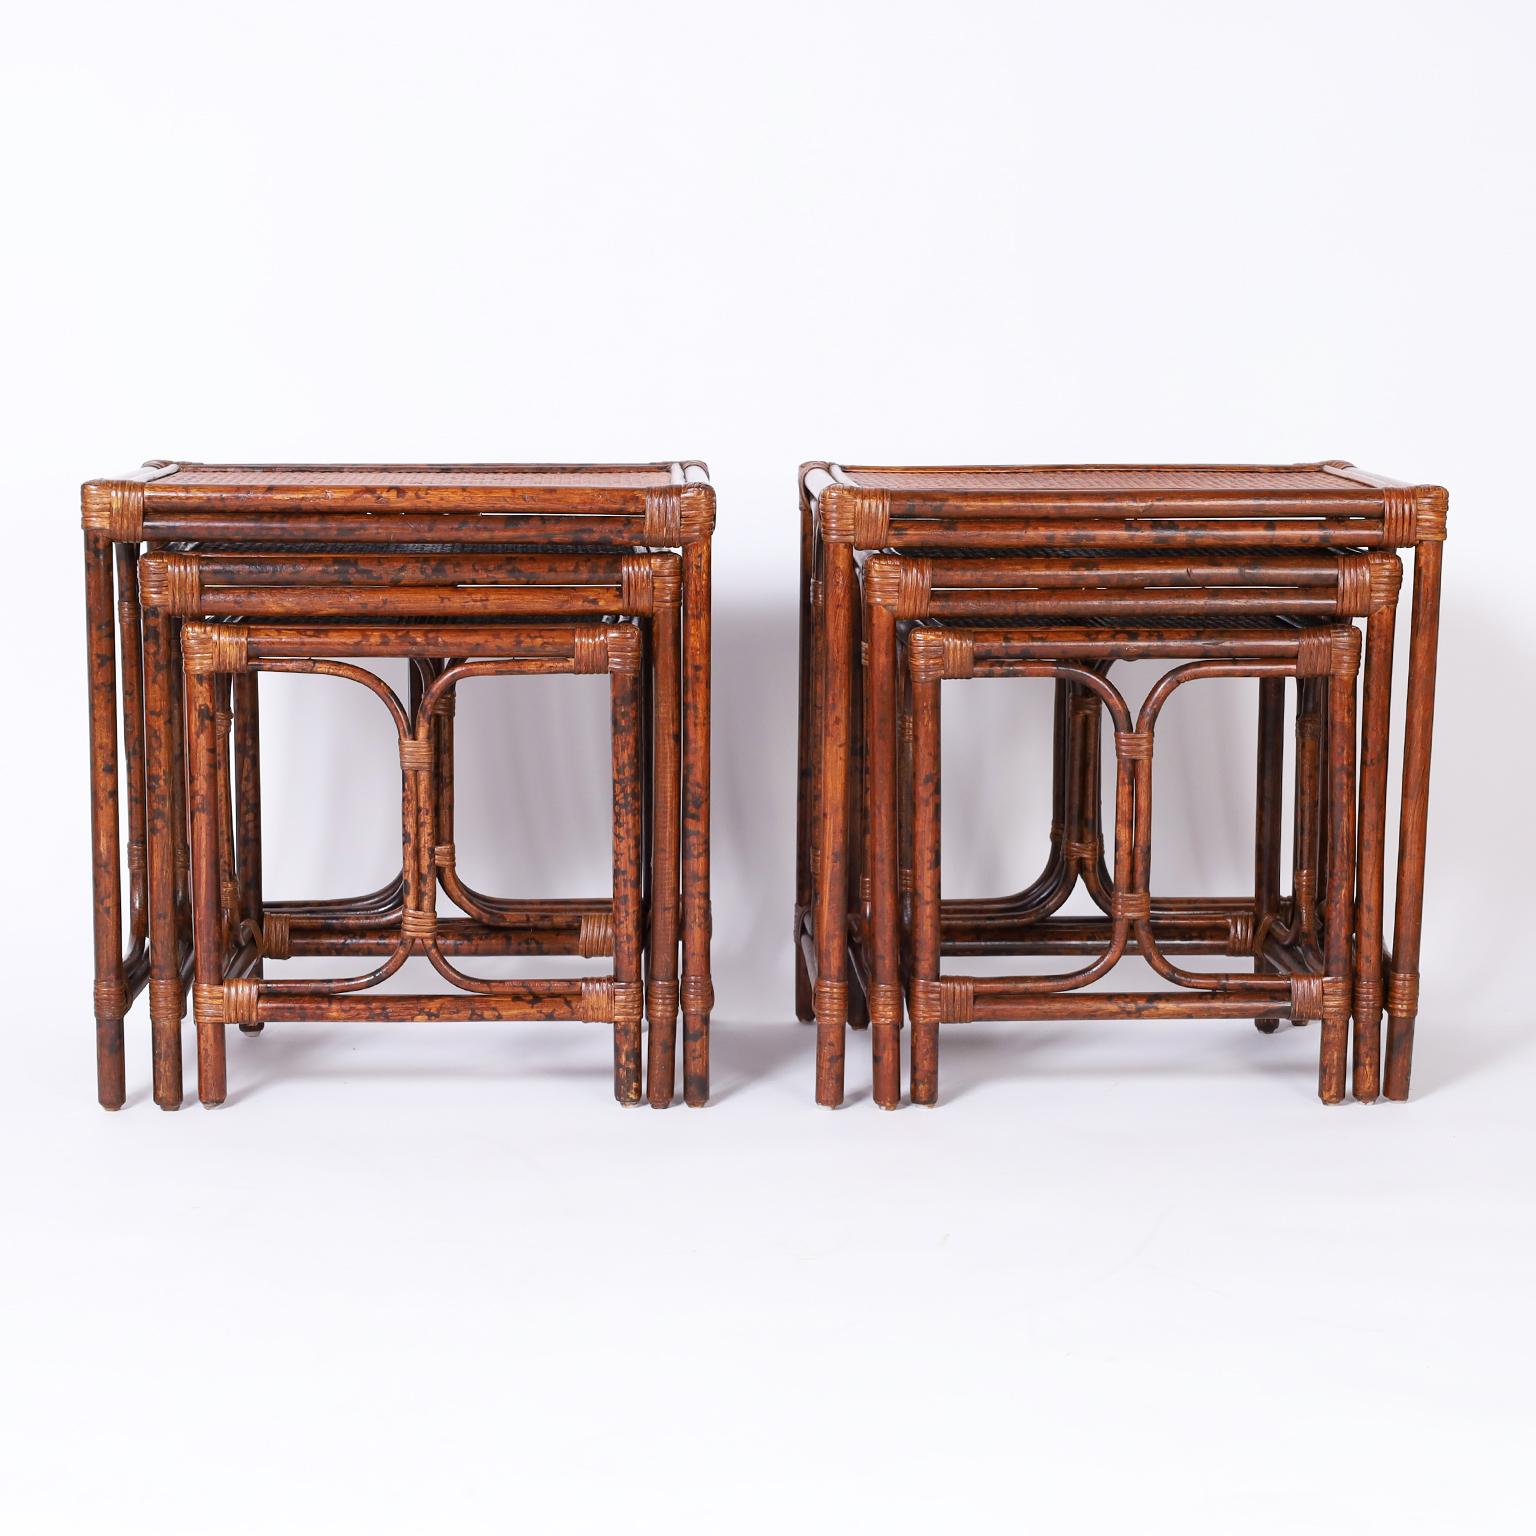 Rare pair of British colonial style nests of tables or stands each with faux bamboo frames wrapped with reed and grass cloth panels on the table tops.


